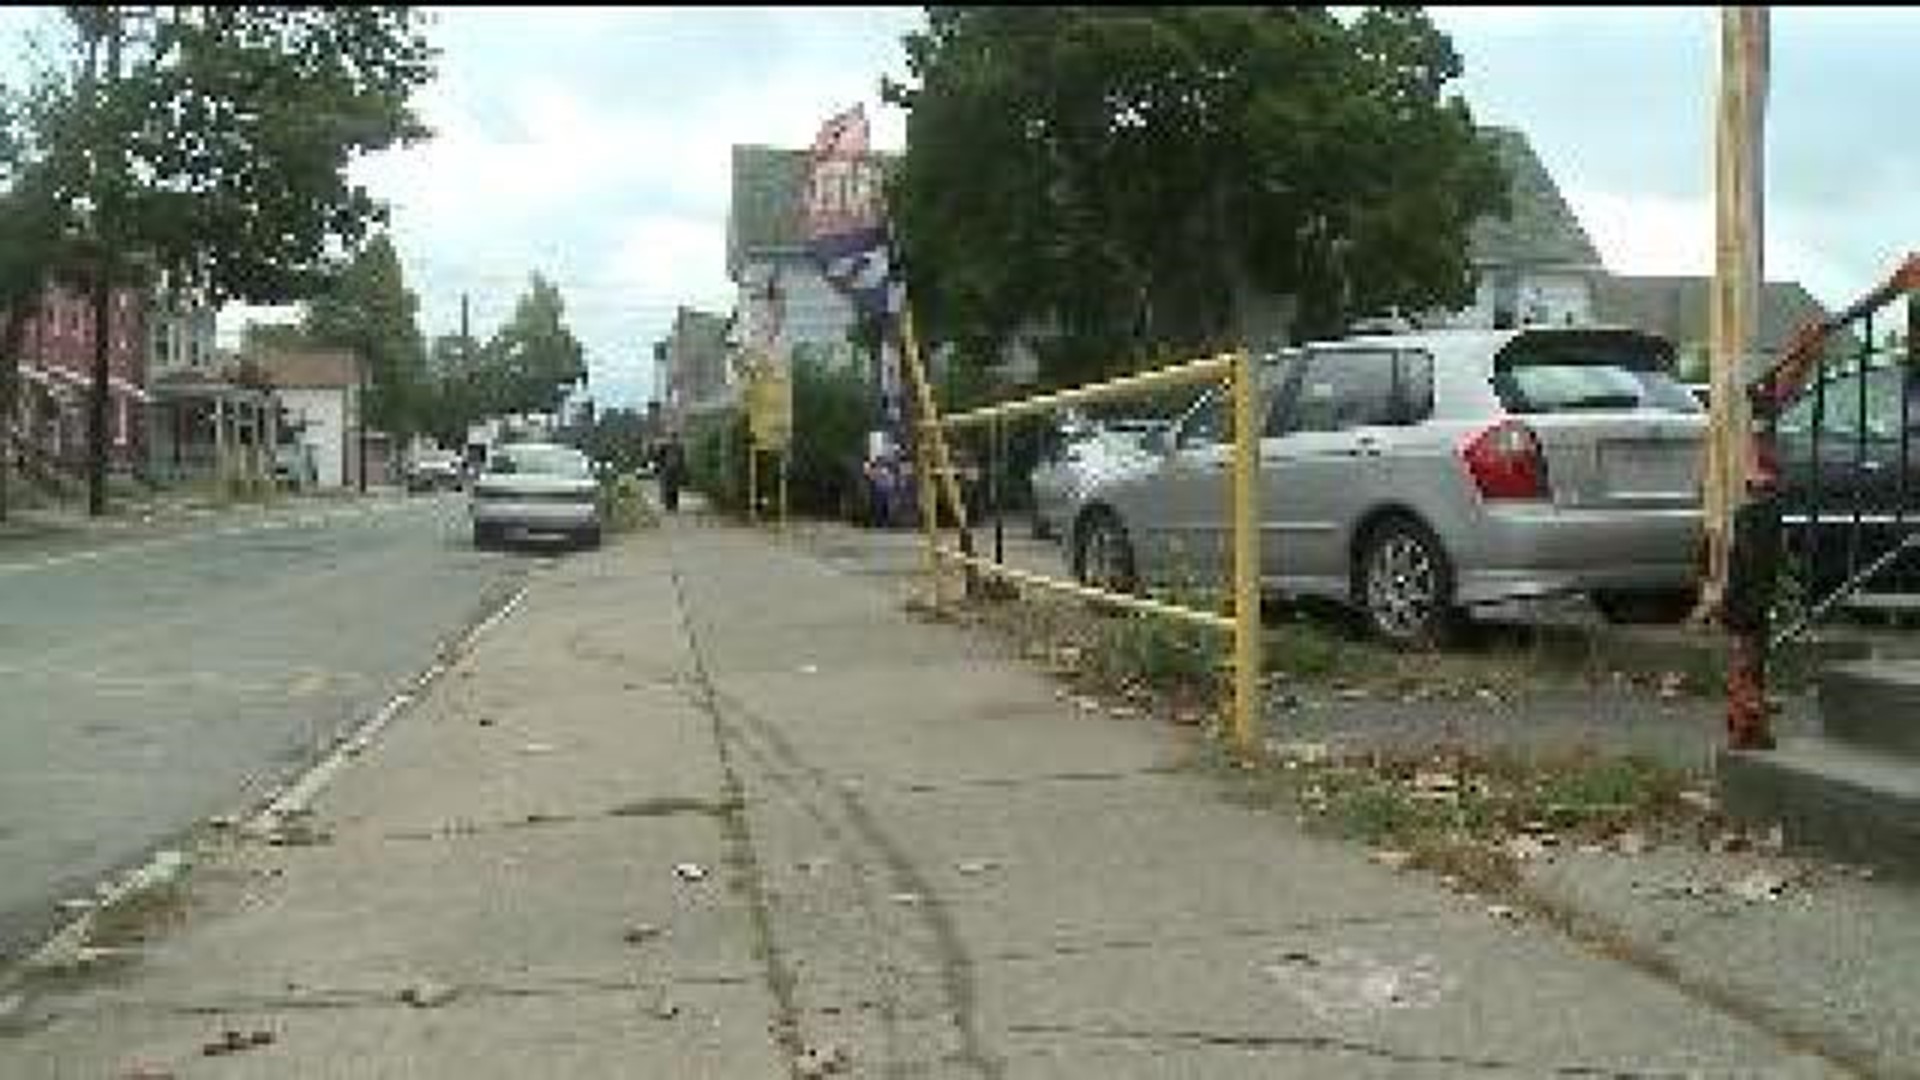 Stabbing Investigation In Wilkes-Barre